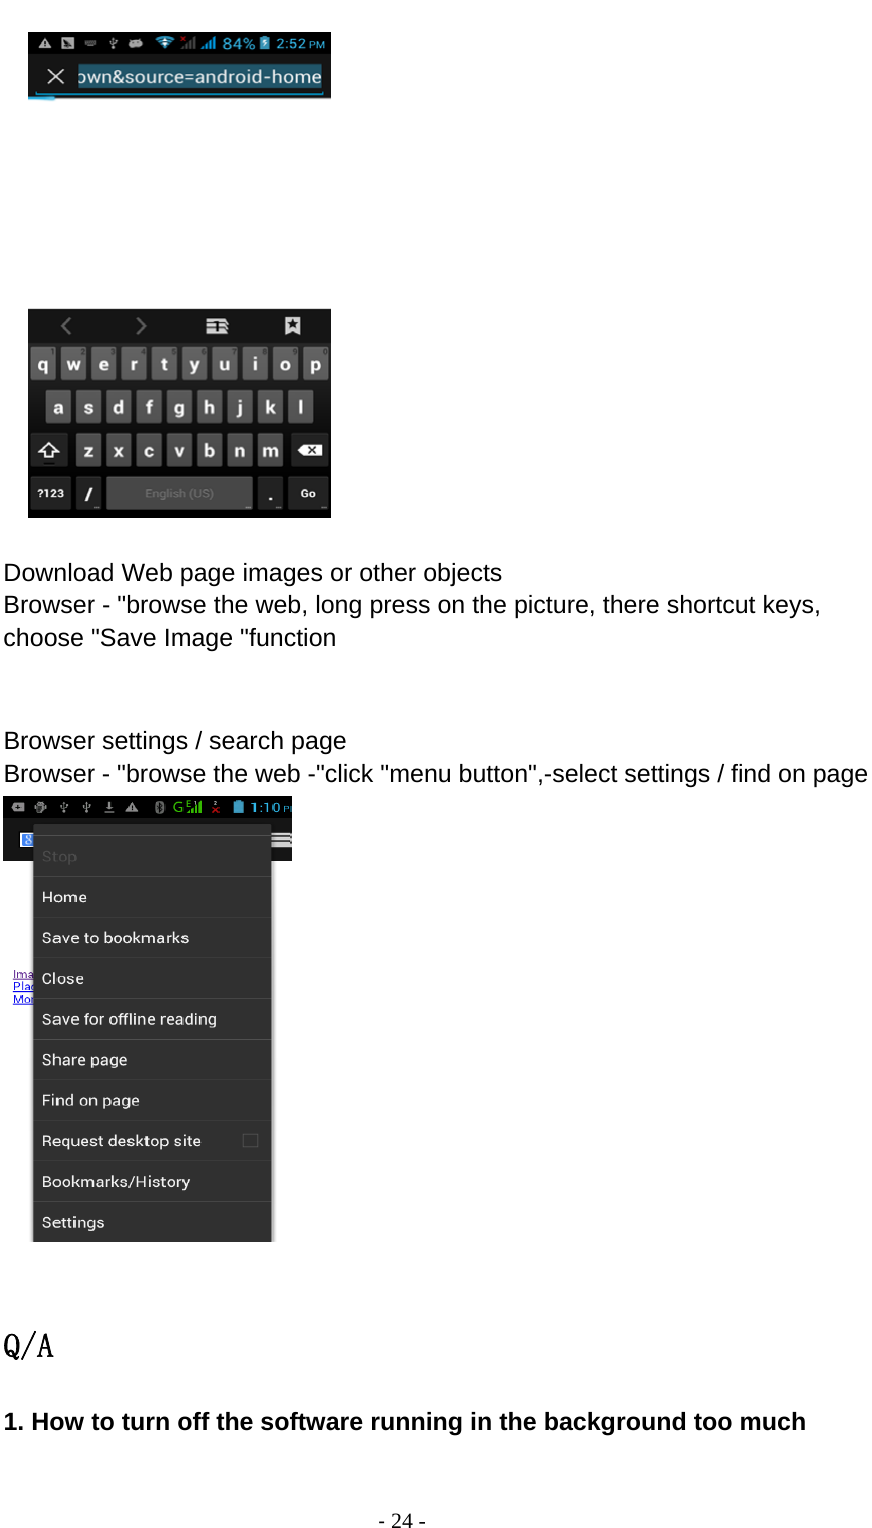                                          ‐ 24 -       Download Web page images or other objects Browser - &quot;browse the web, long press on the picture, there shortcut keys, choose &quot;Save Image &quot;function   Browser settings / search page Browser - &quot;browse the web -&quot;click &quot;menu button&quot;,-select settings / find on page   Q/A 1. How to turn off the software running in the background too much  